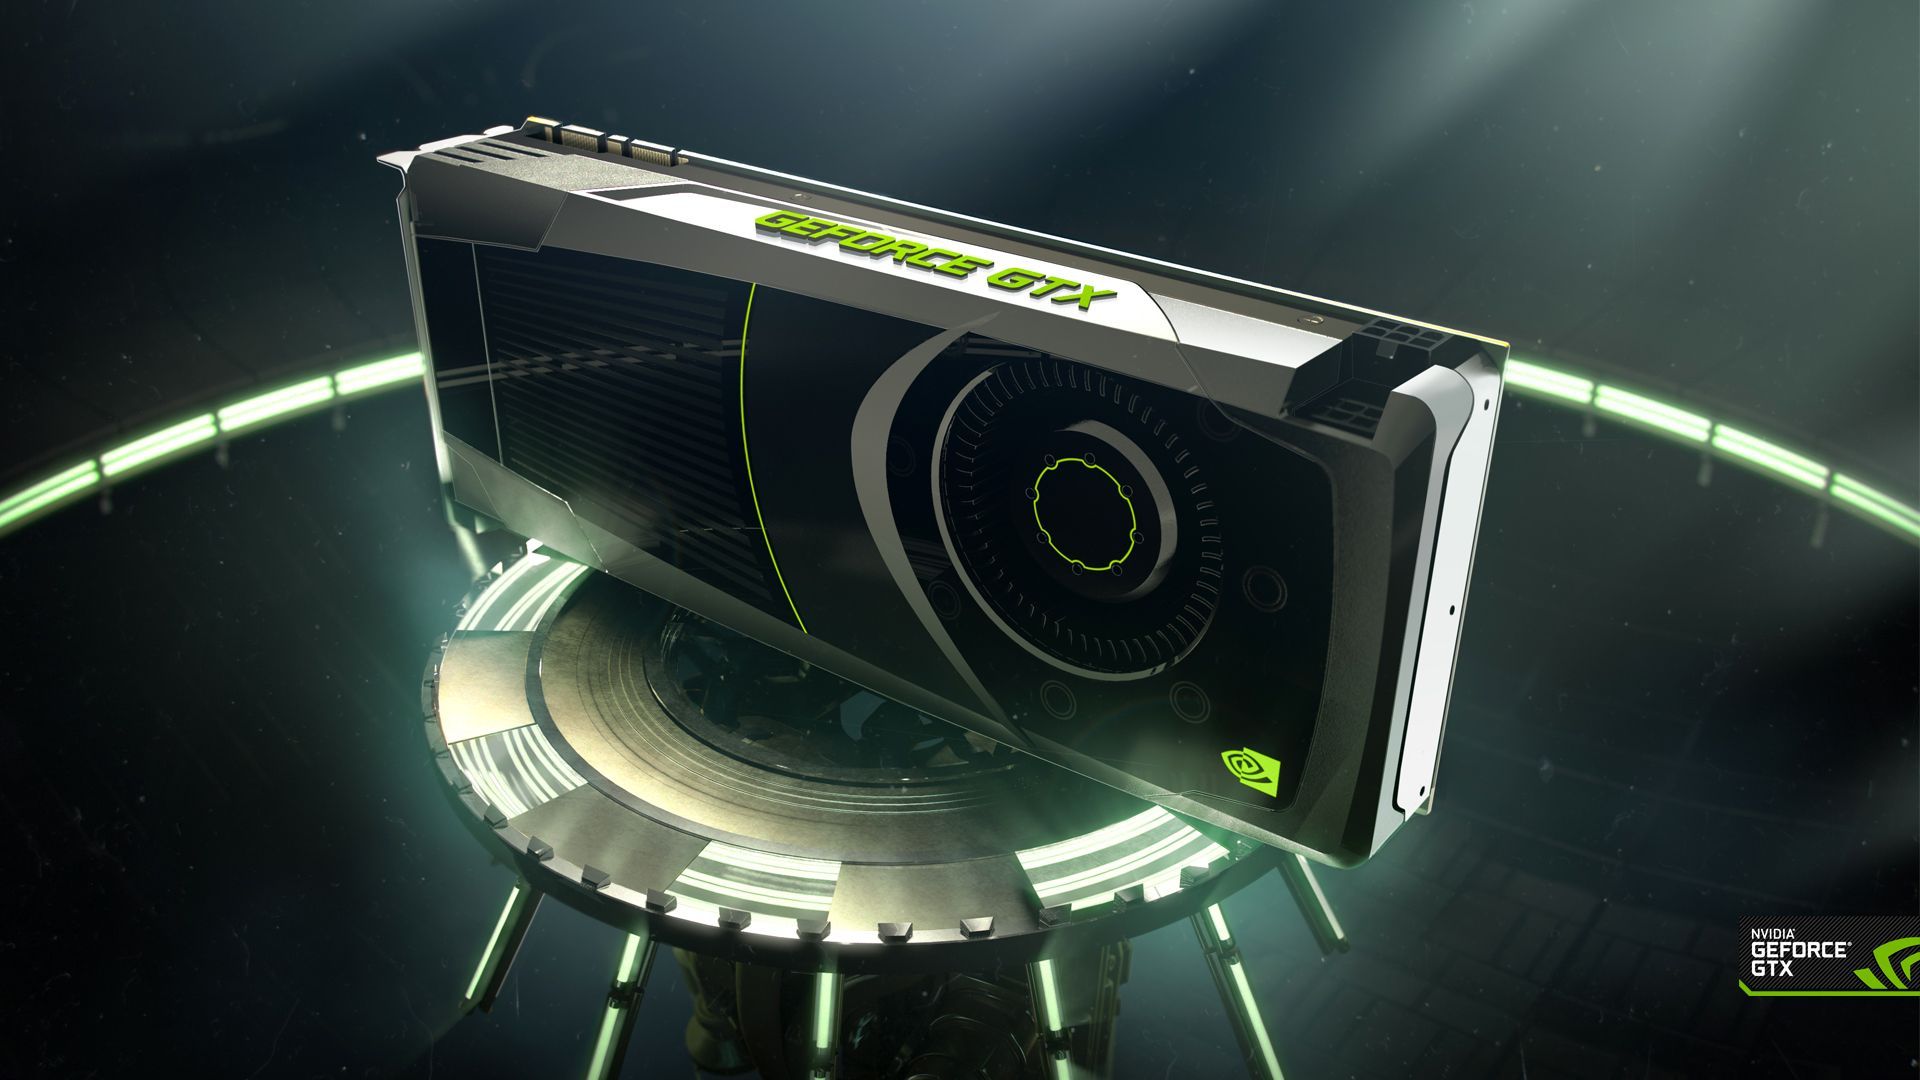 NVIDIA GeForce GTX 680 Wallpaper Now Available | GeForce